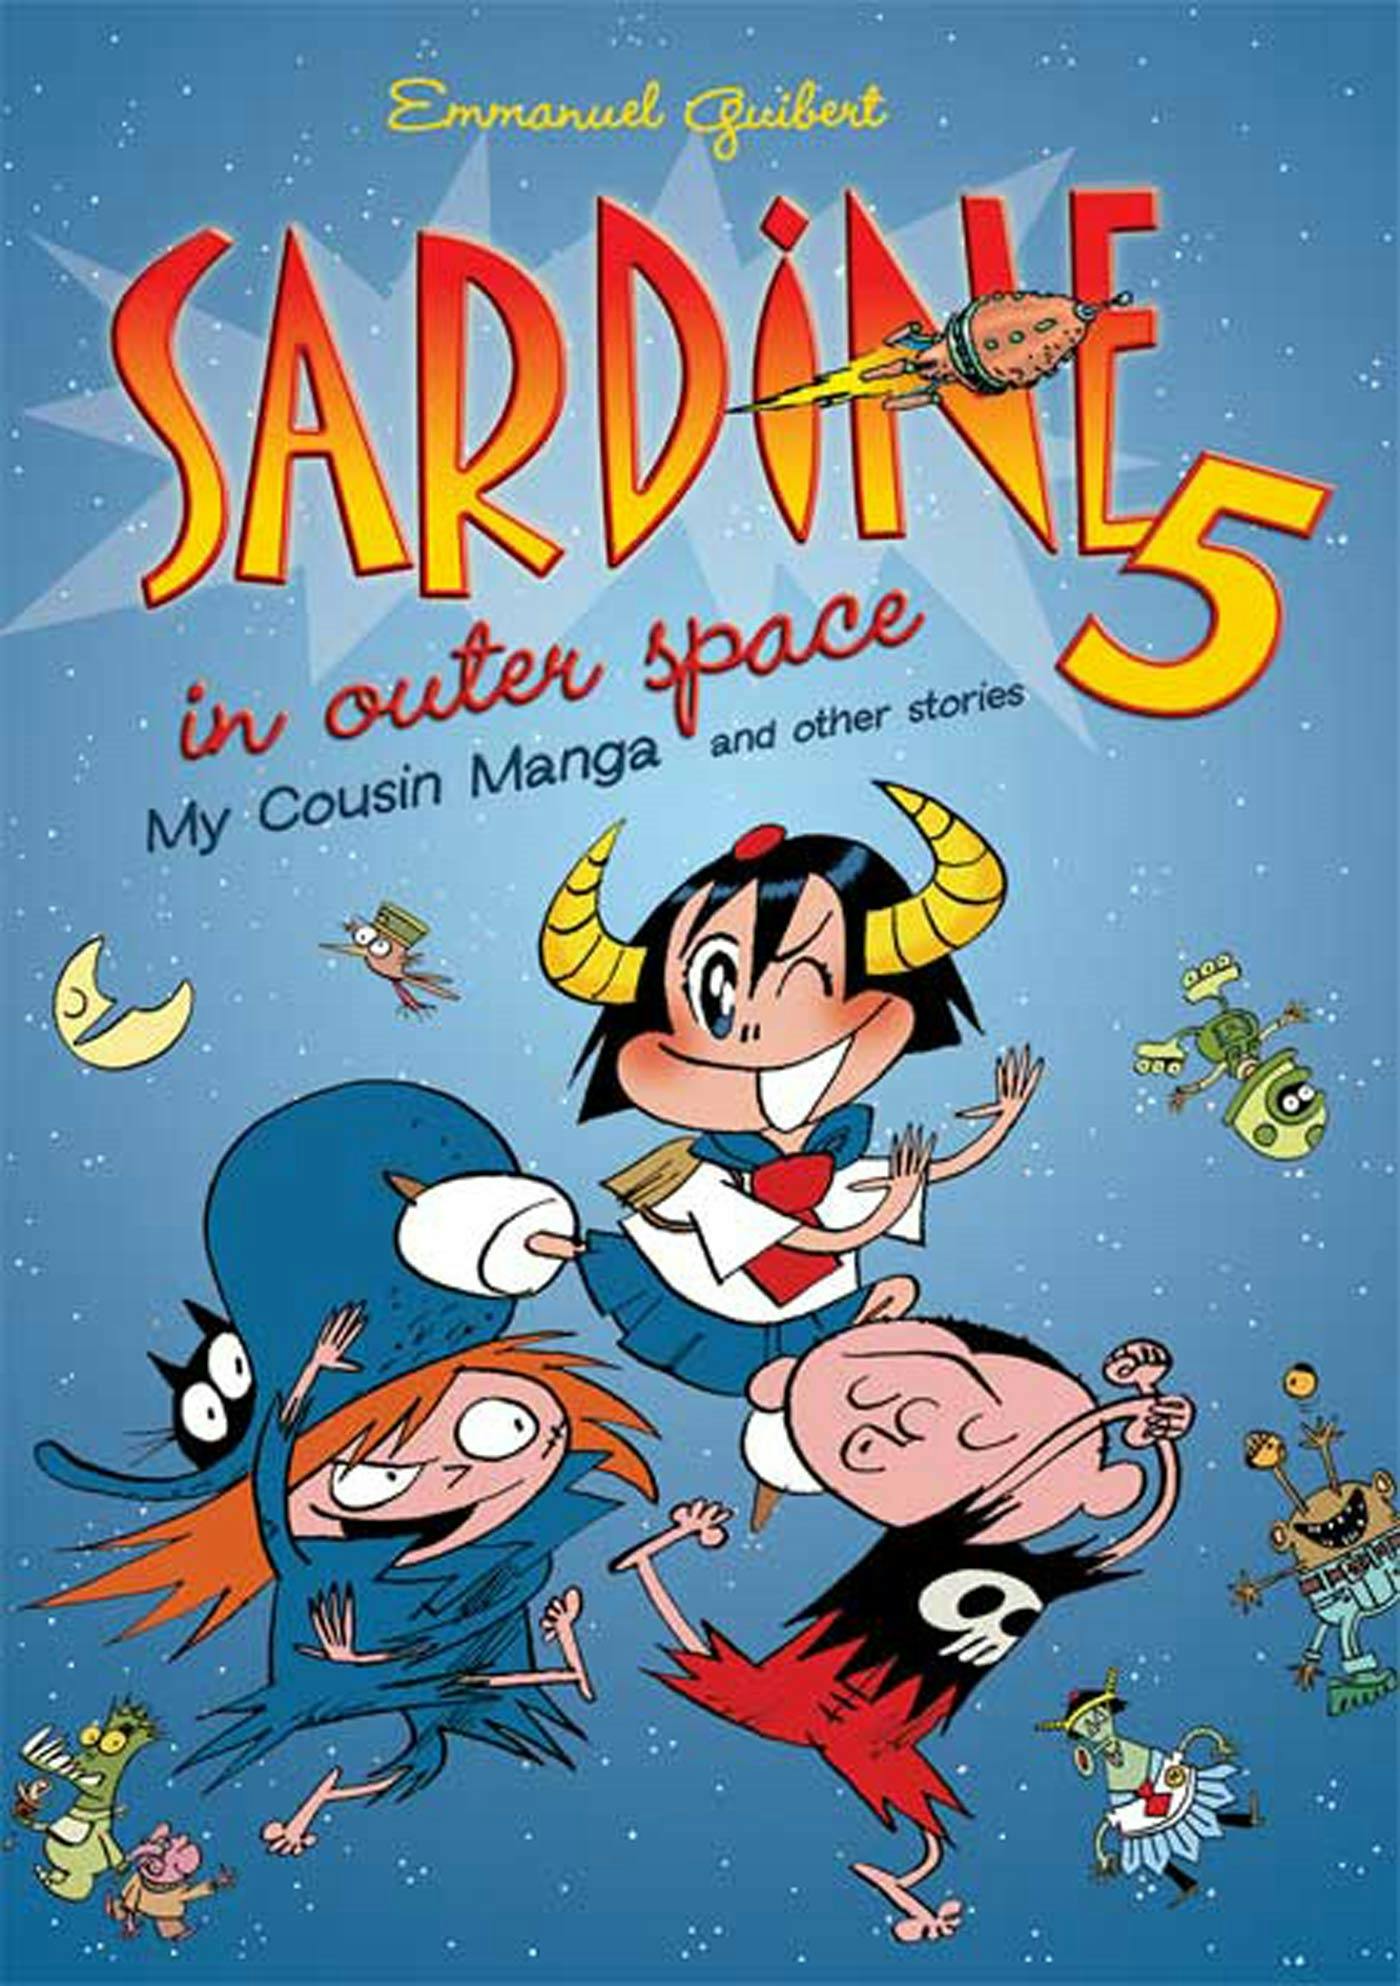 Image of Sardine in Outer Space 5